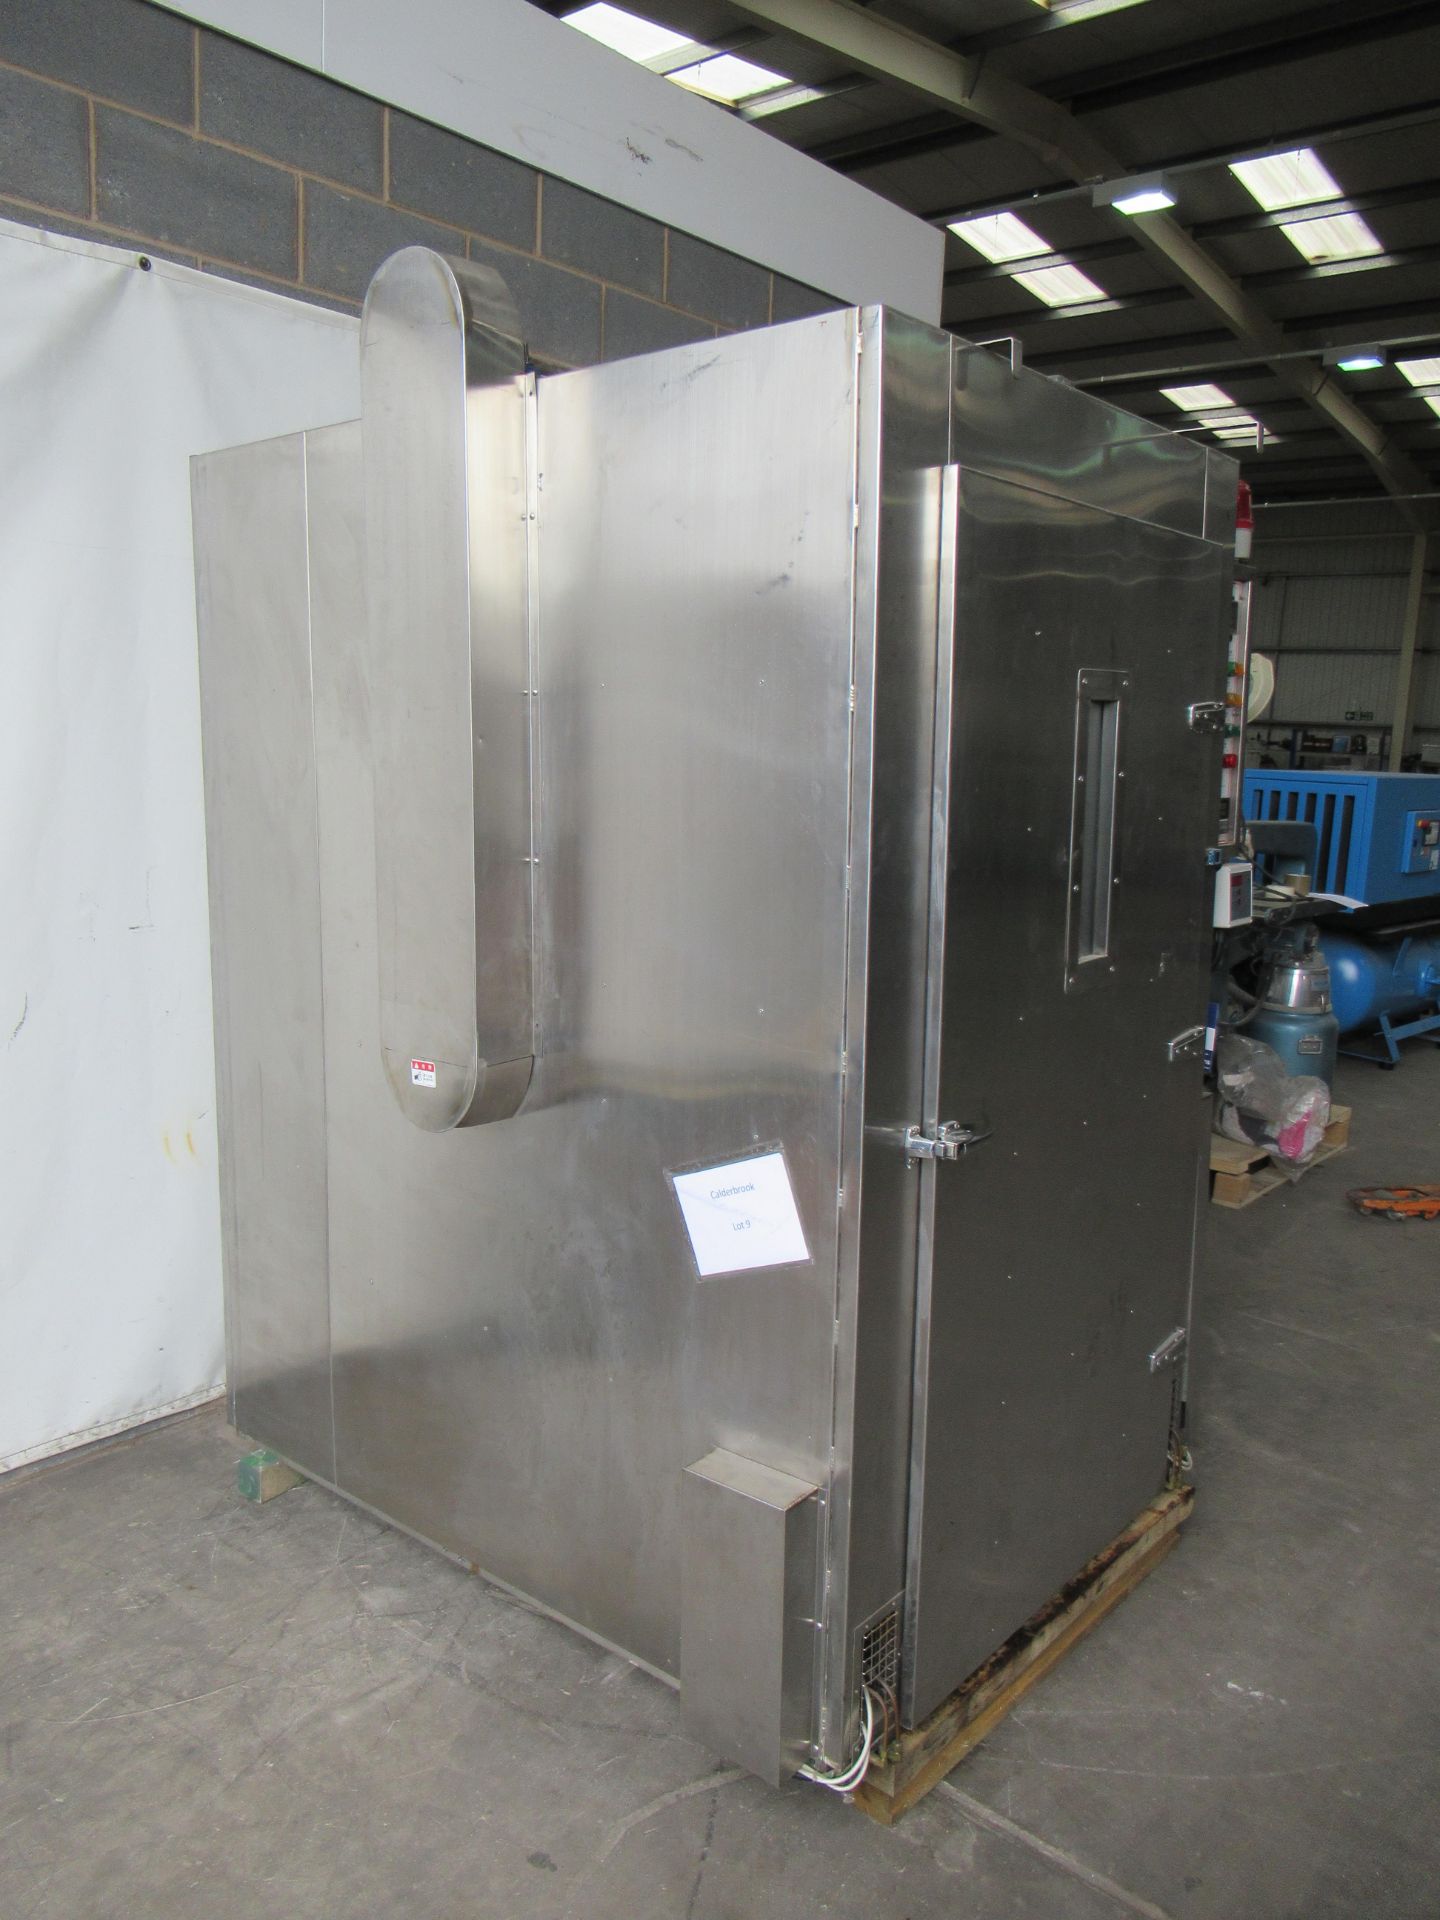 Tsung Hsing 'box type dryer' commercial oven/dryer with two trollies, 415V, 50Hz - Image 2 of 7